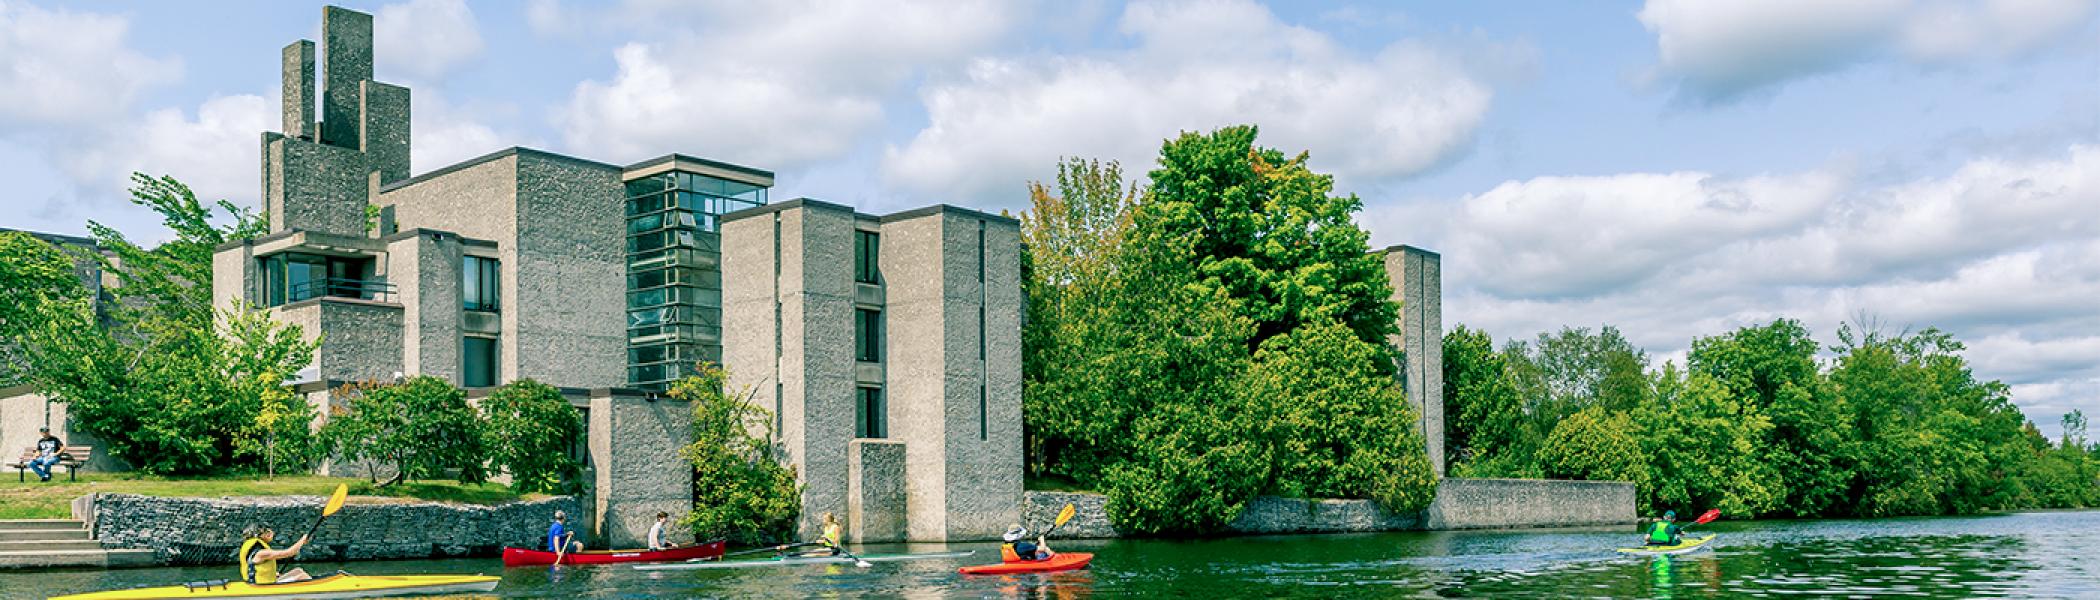 Four people kayaking downstream in front of Champlain college on a sunny day.